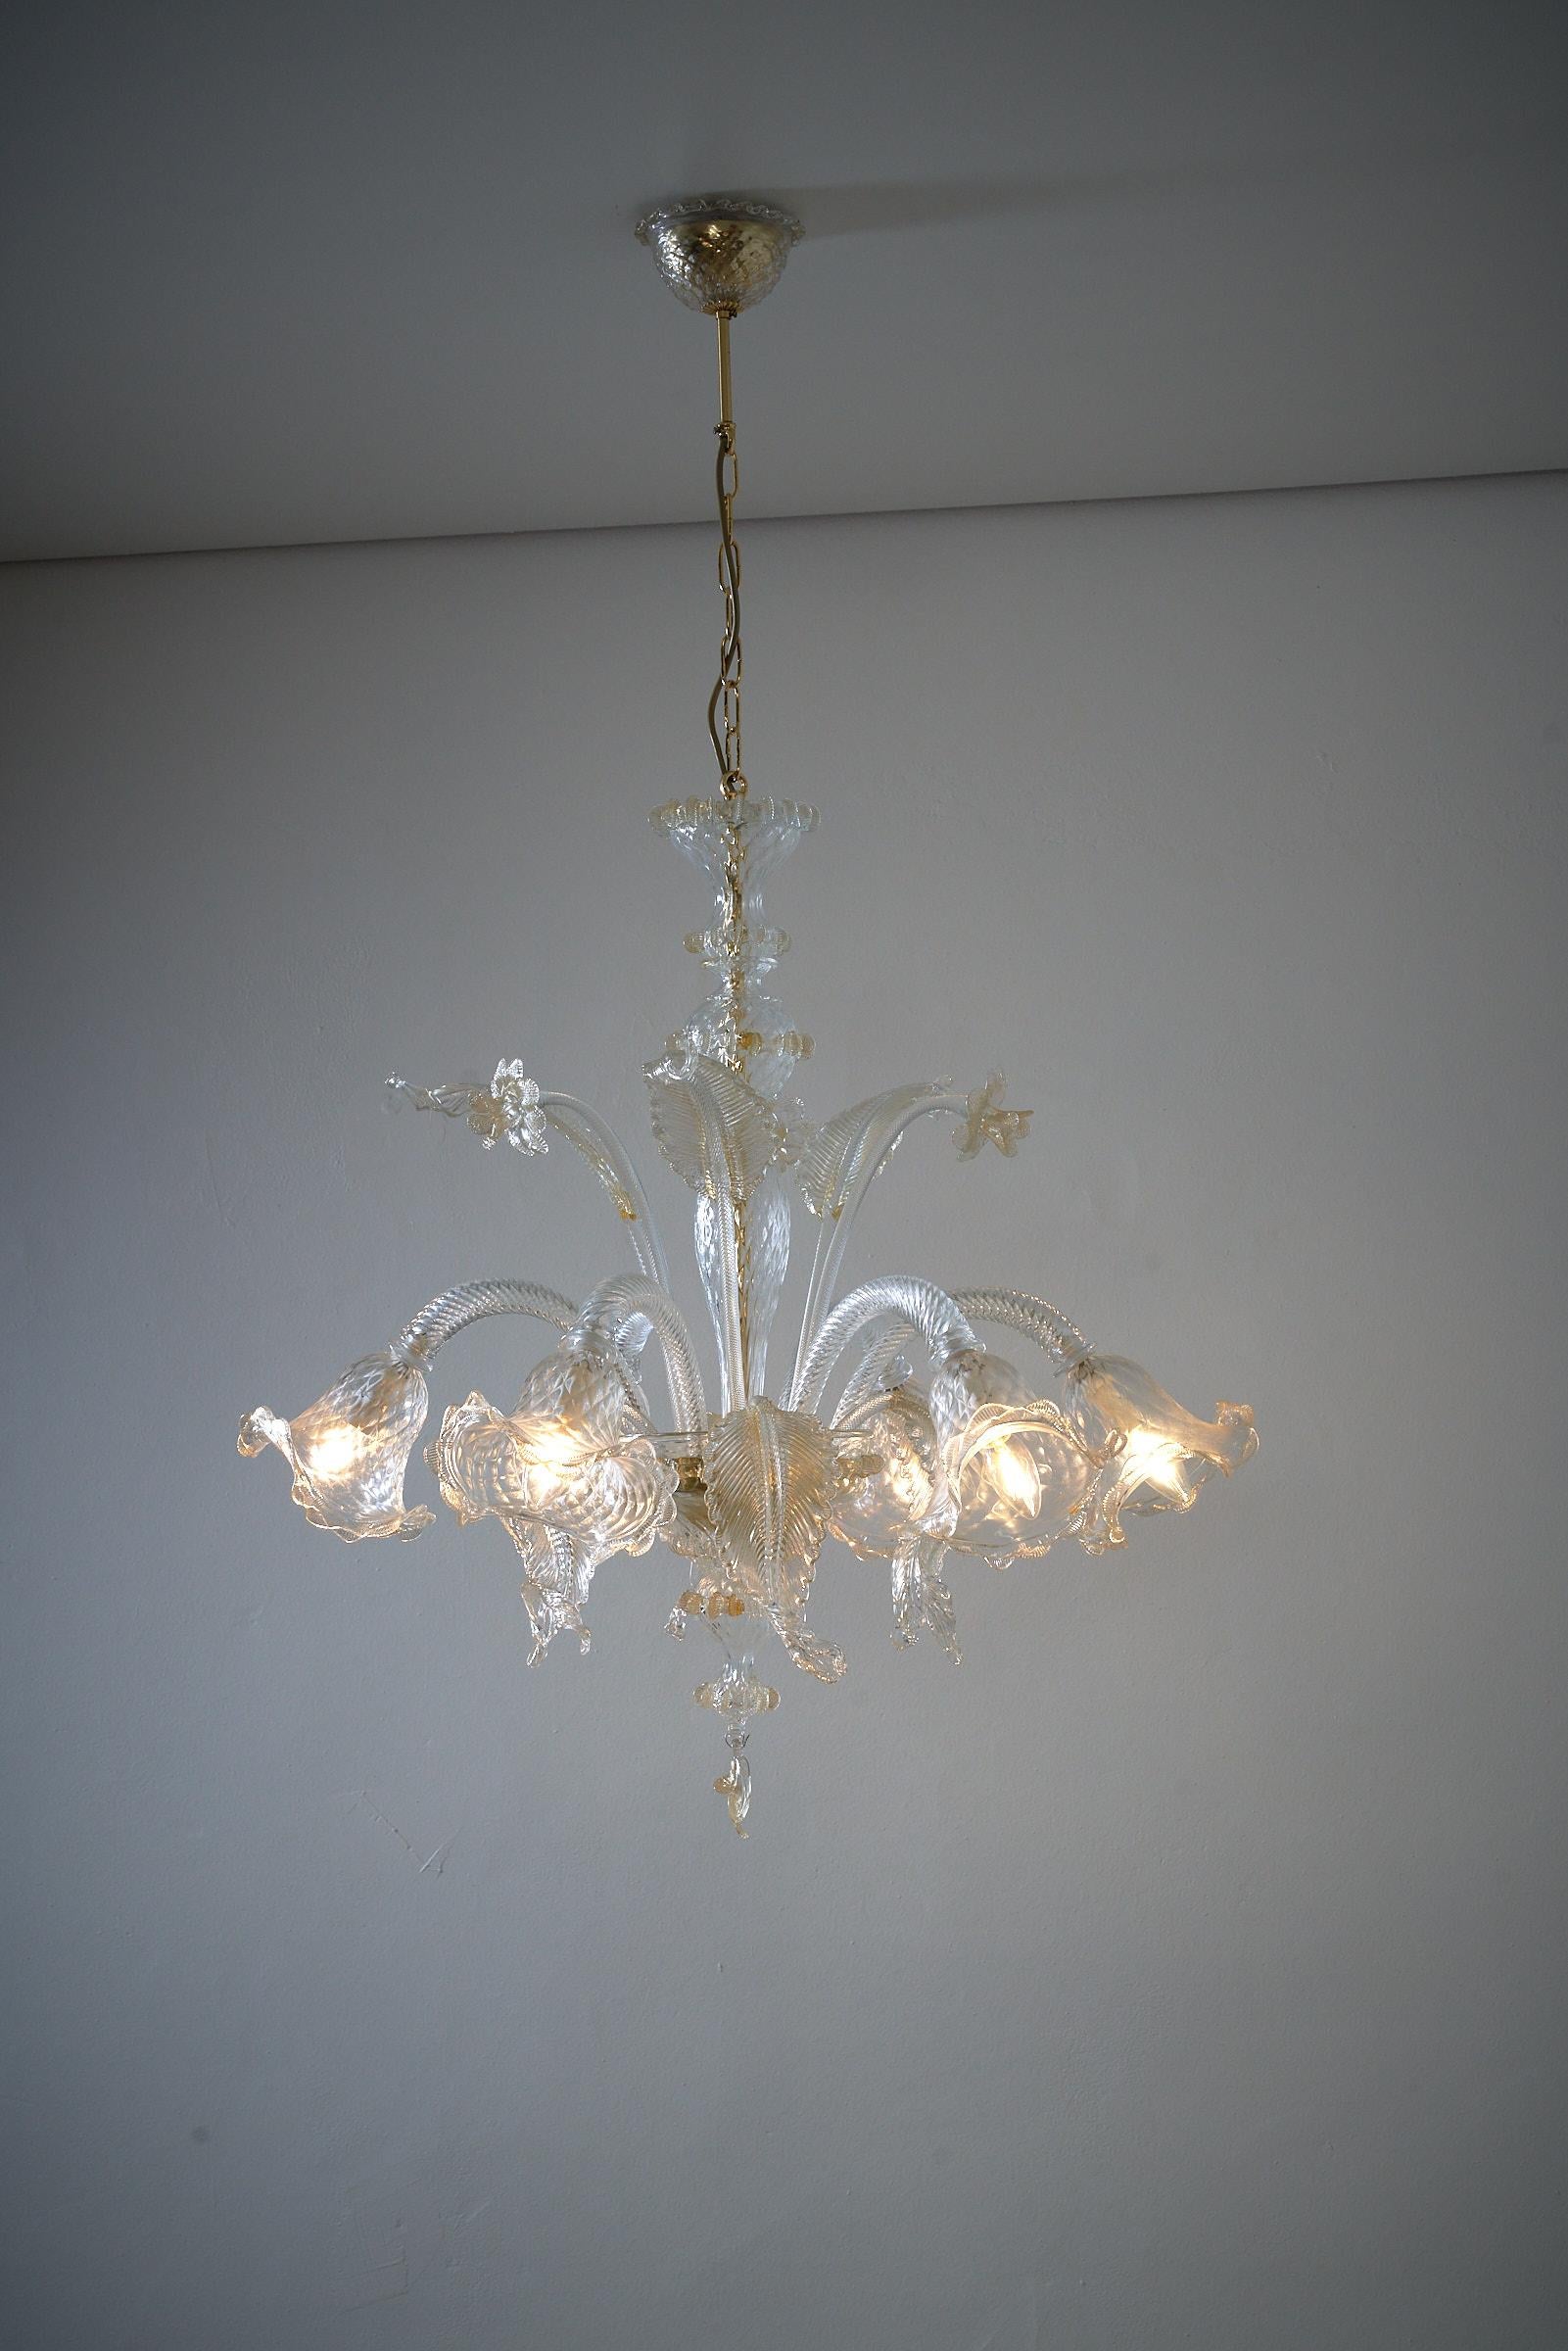 Murano Chandelier in very good condition.